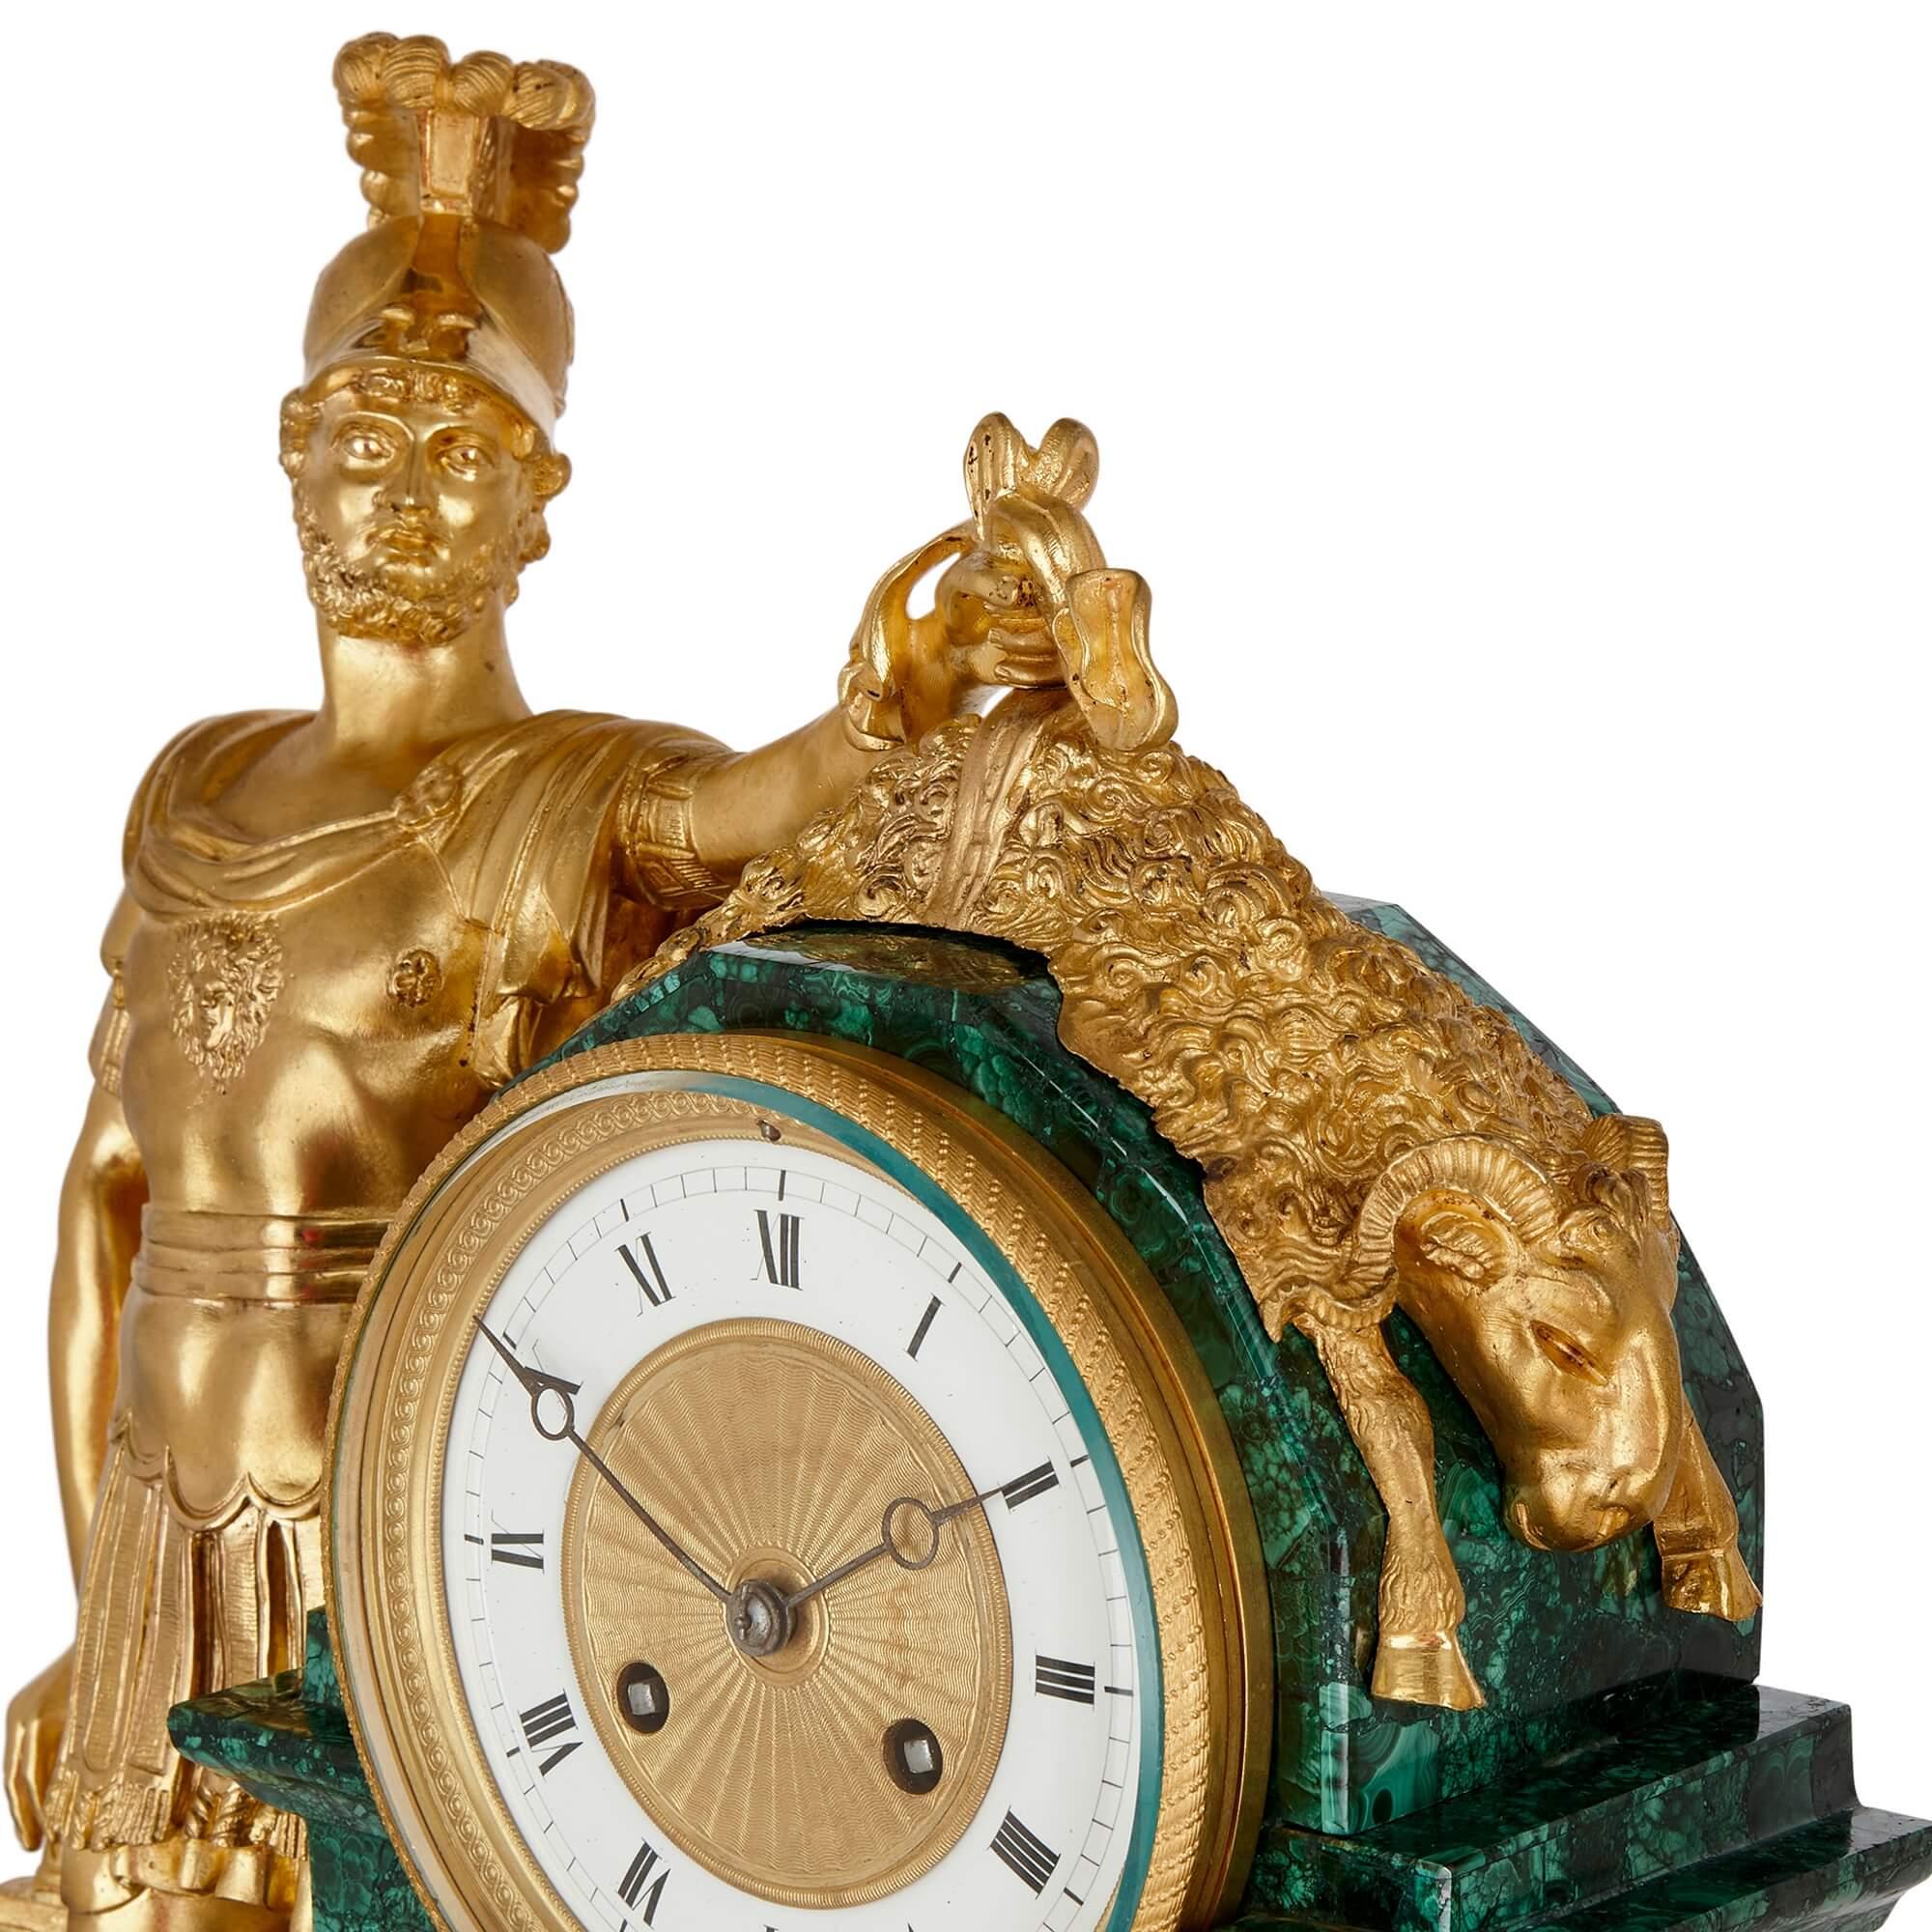 19th Century Large Empire Style Ormolu and Malachite Mantel Clock with Mythological Sculpture For Sale